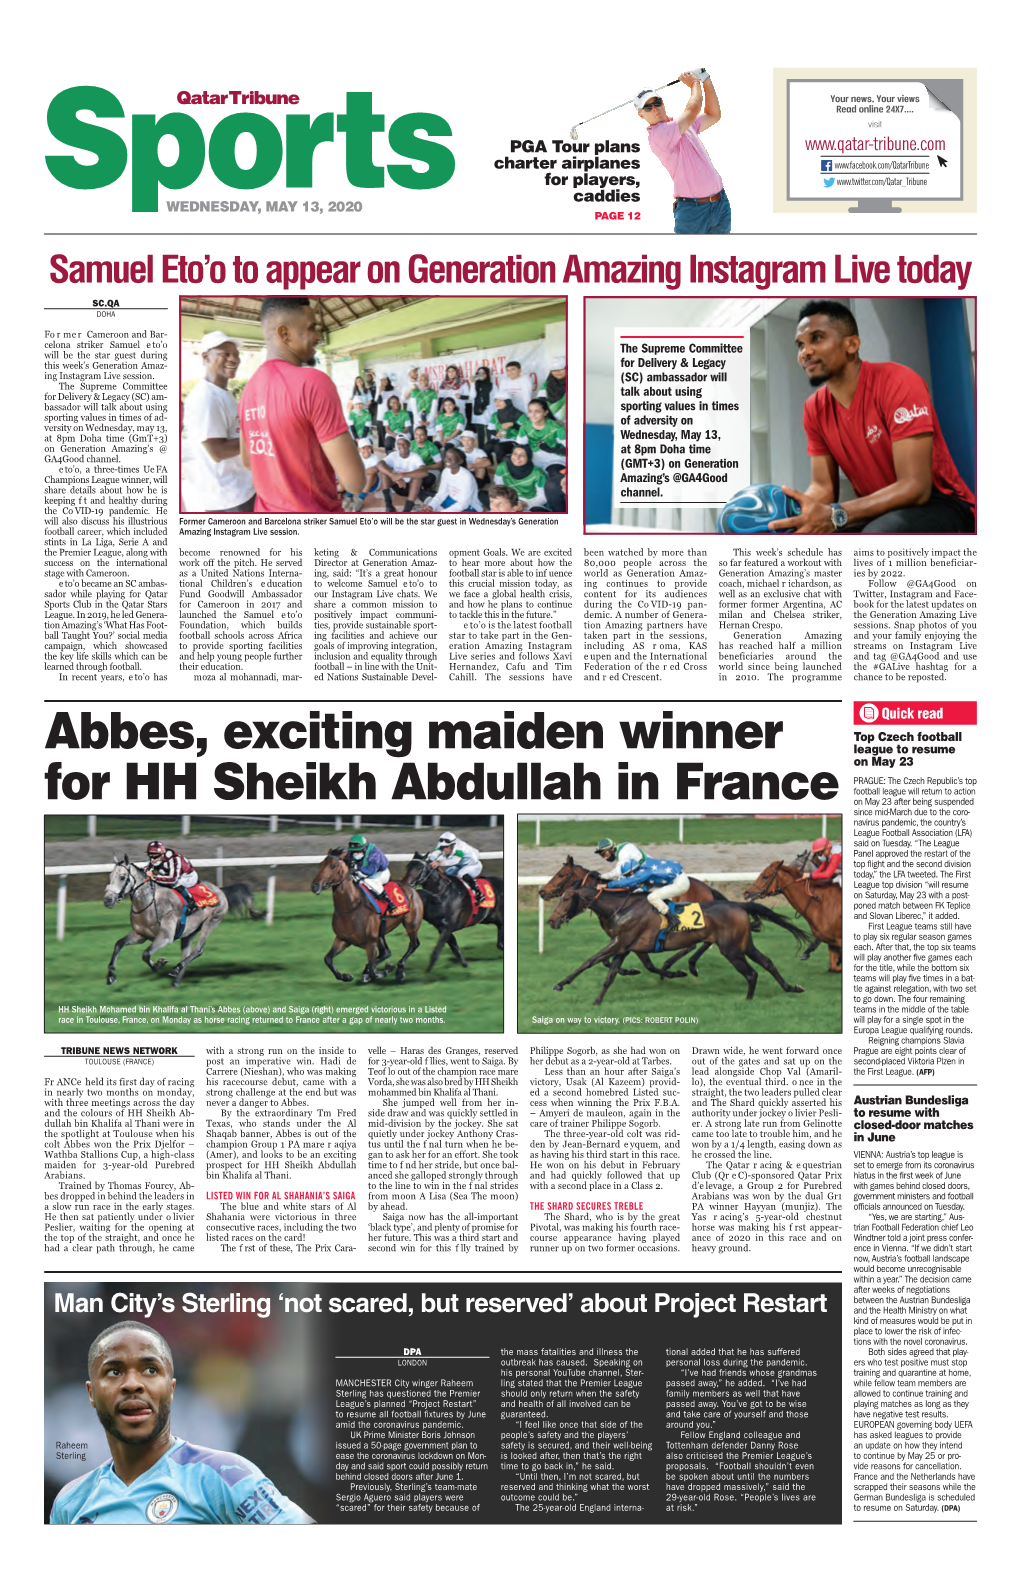 Abbes, Exciting Maiden Winner for HH Sheikh Abdullah in France